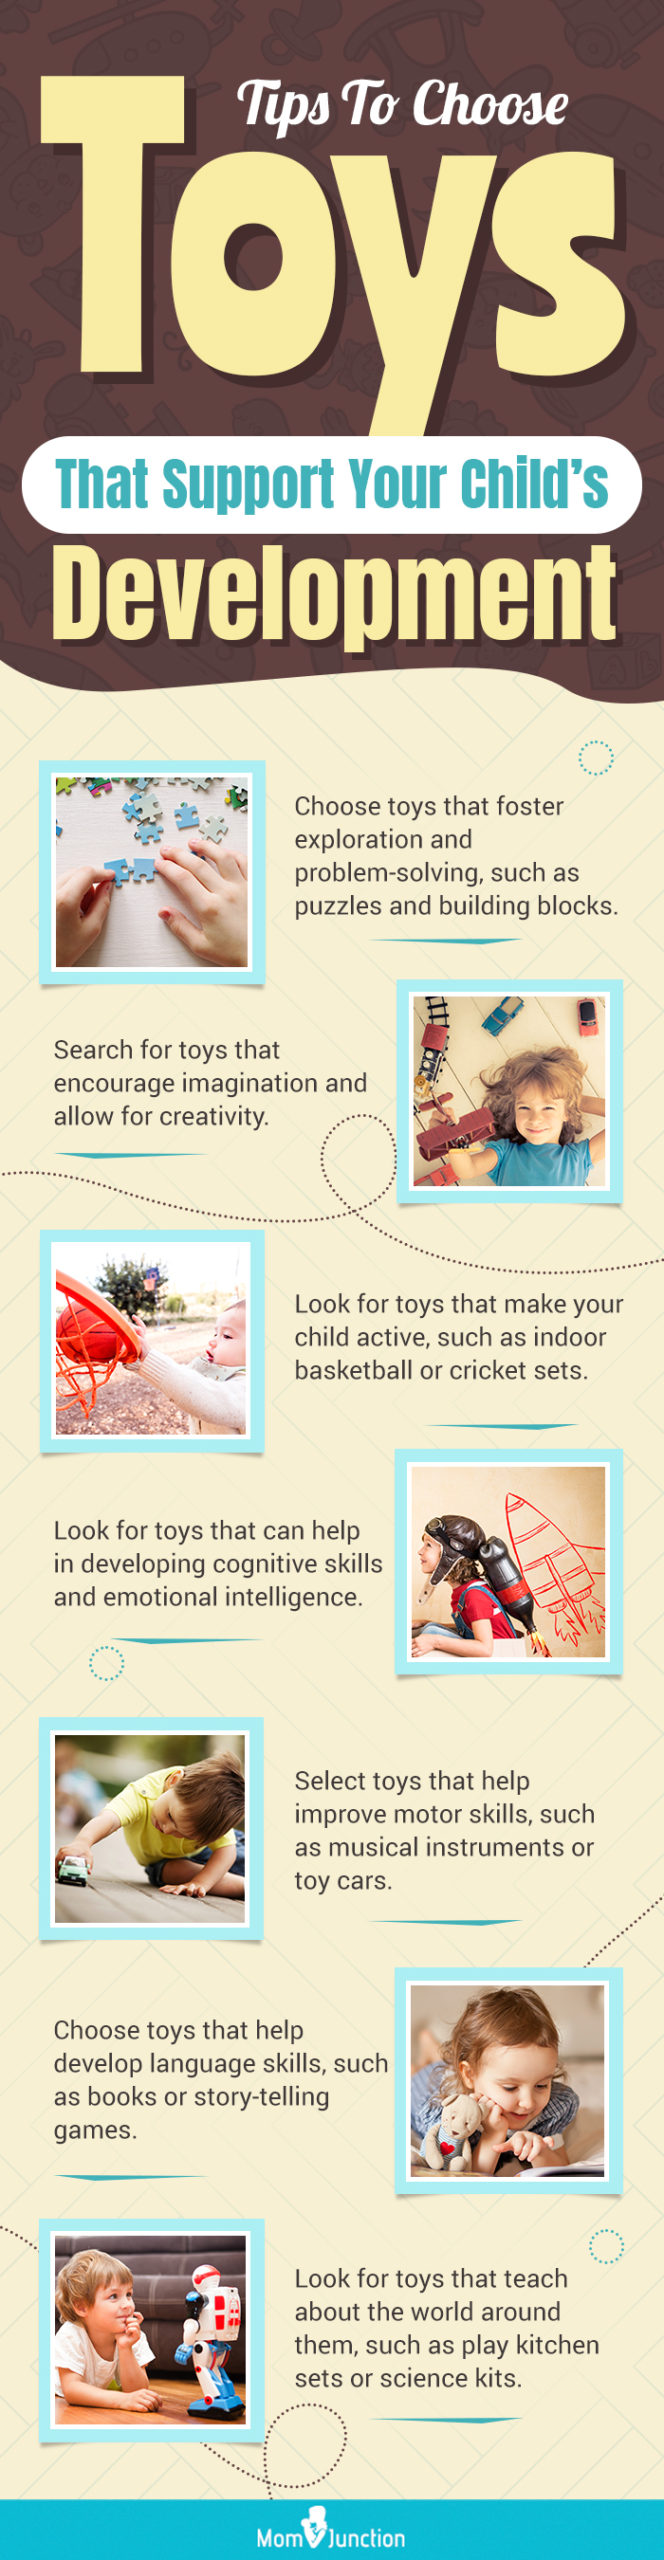 Tips-To-Choose-Toys-That-Support-Your-Child’s-Development (infographic)